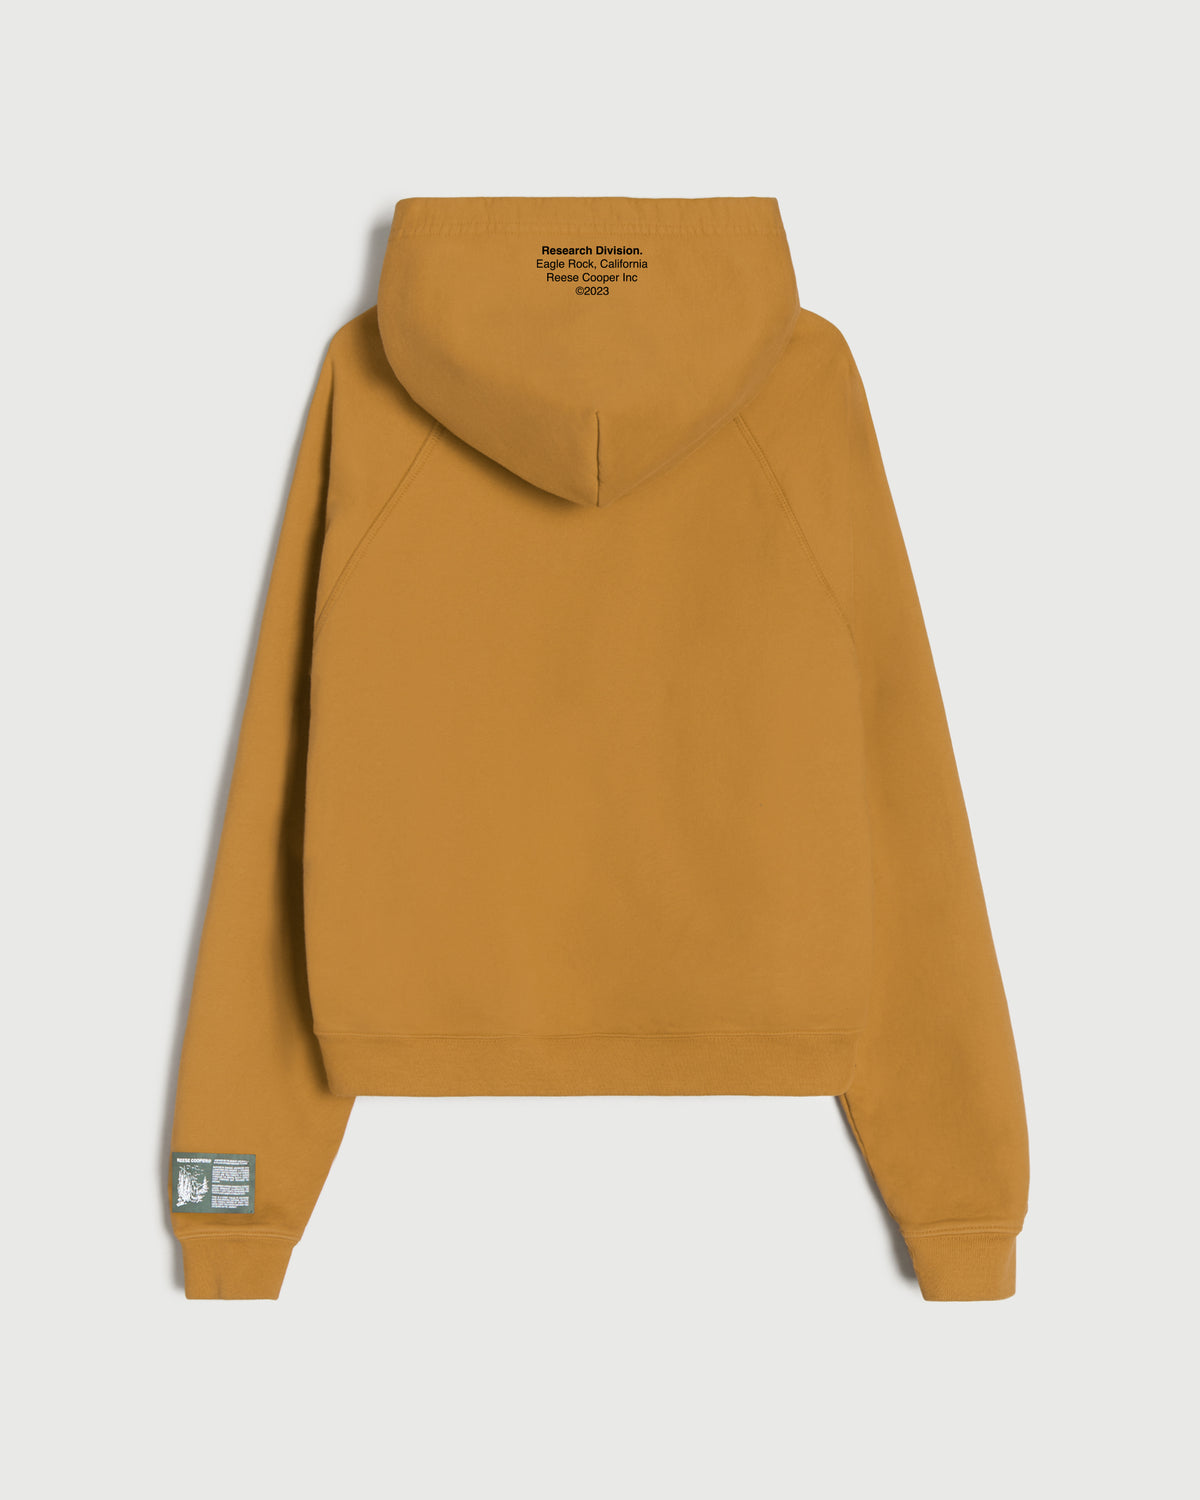 Field Research Division Hooded Sweatshirt in Yellow